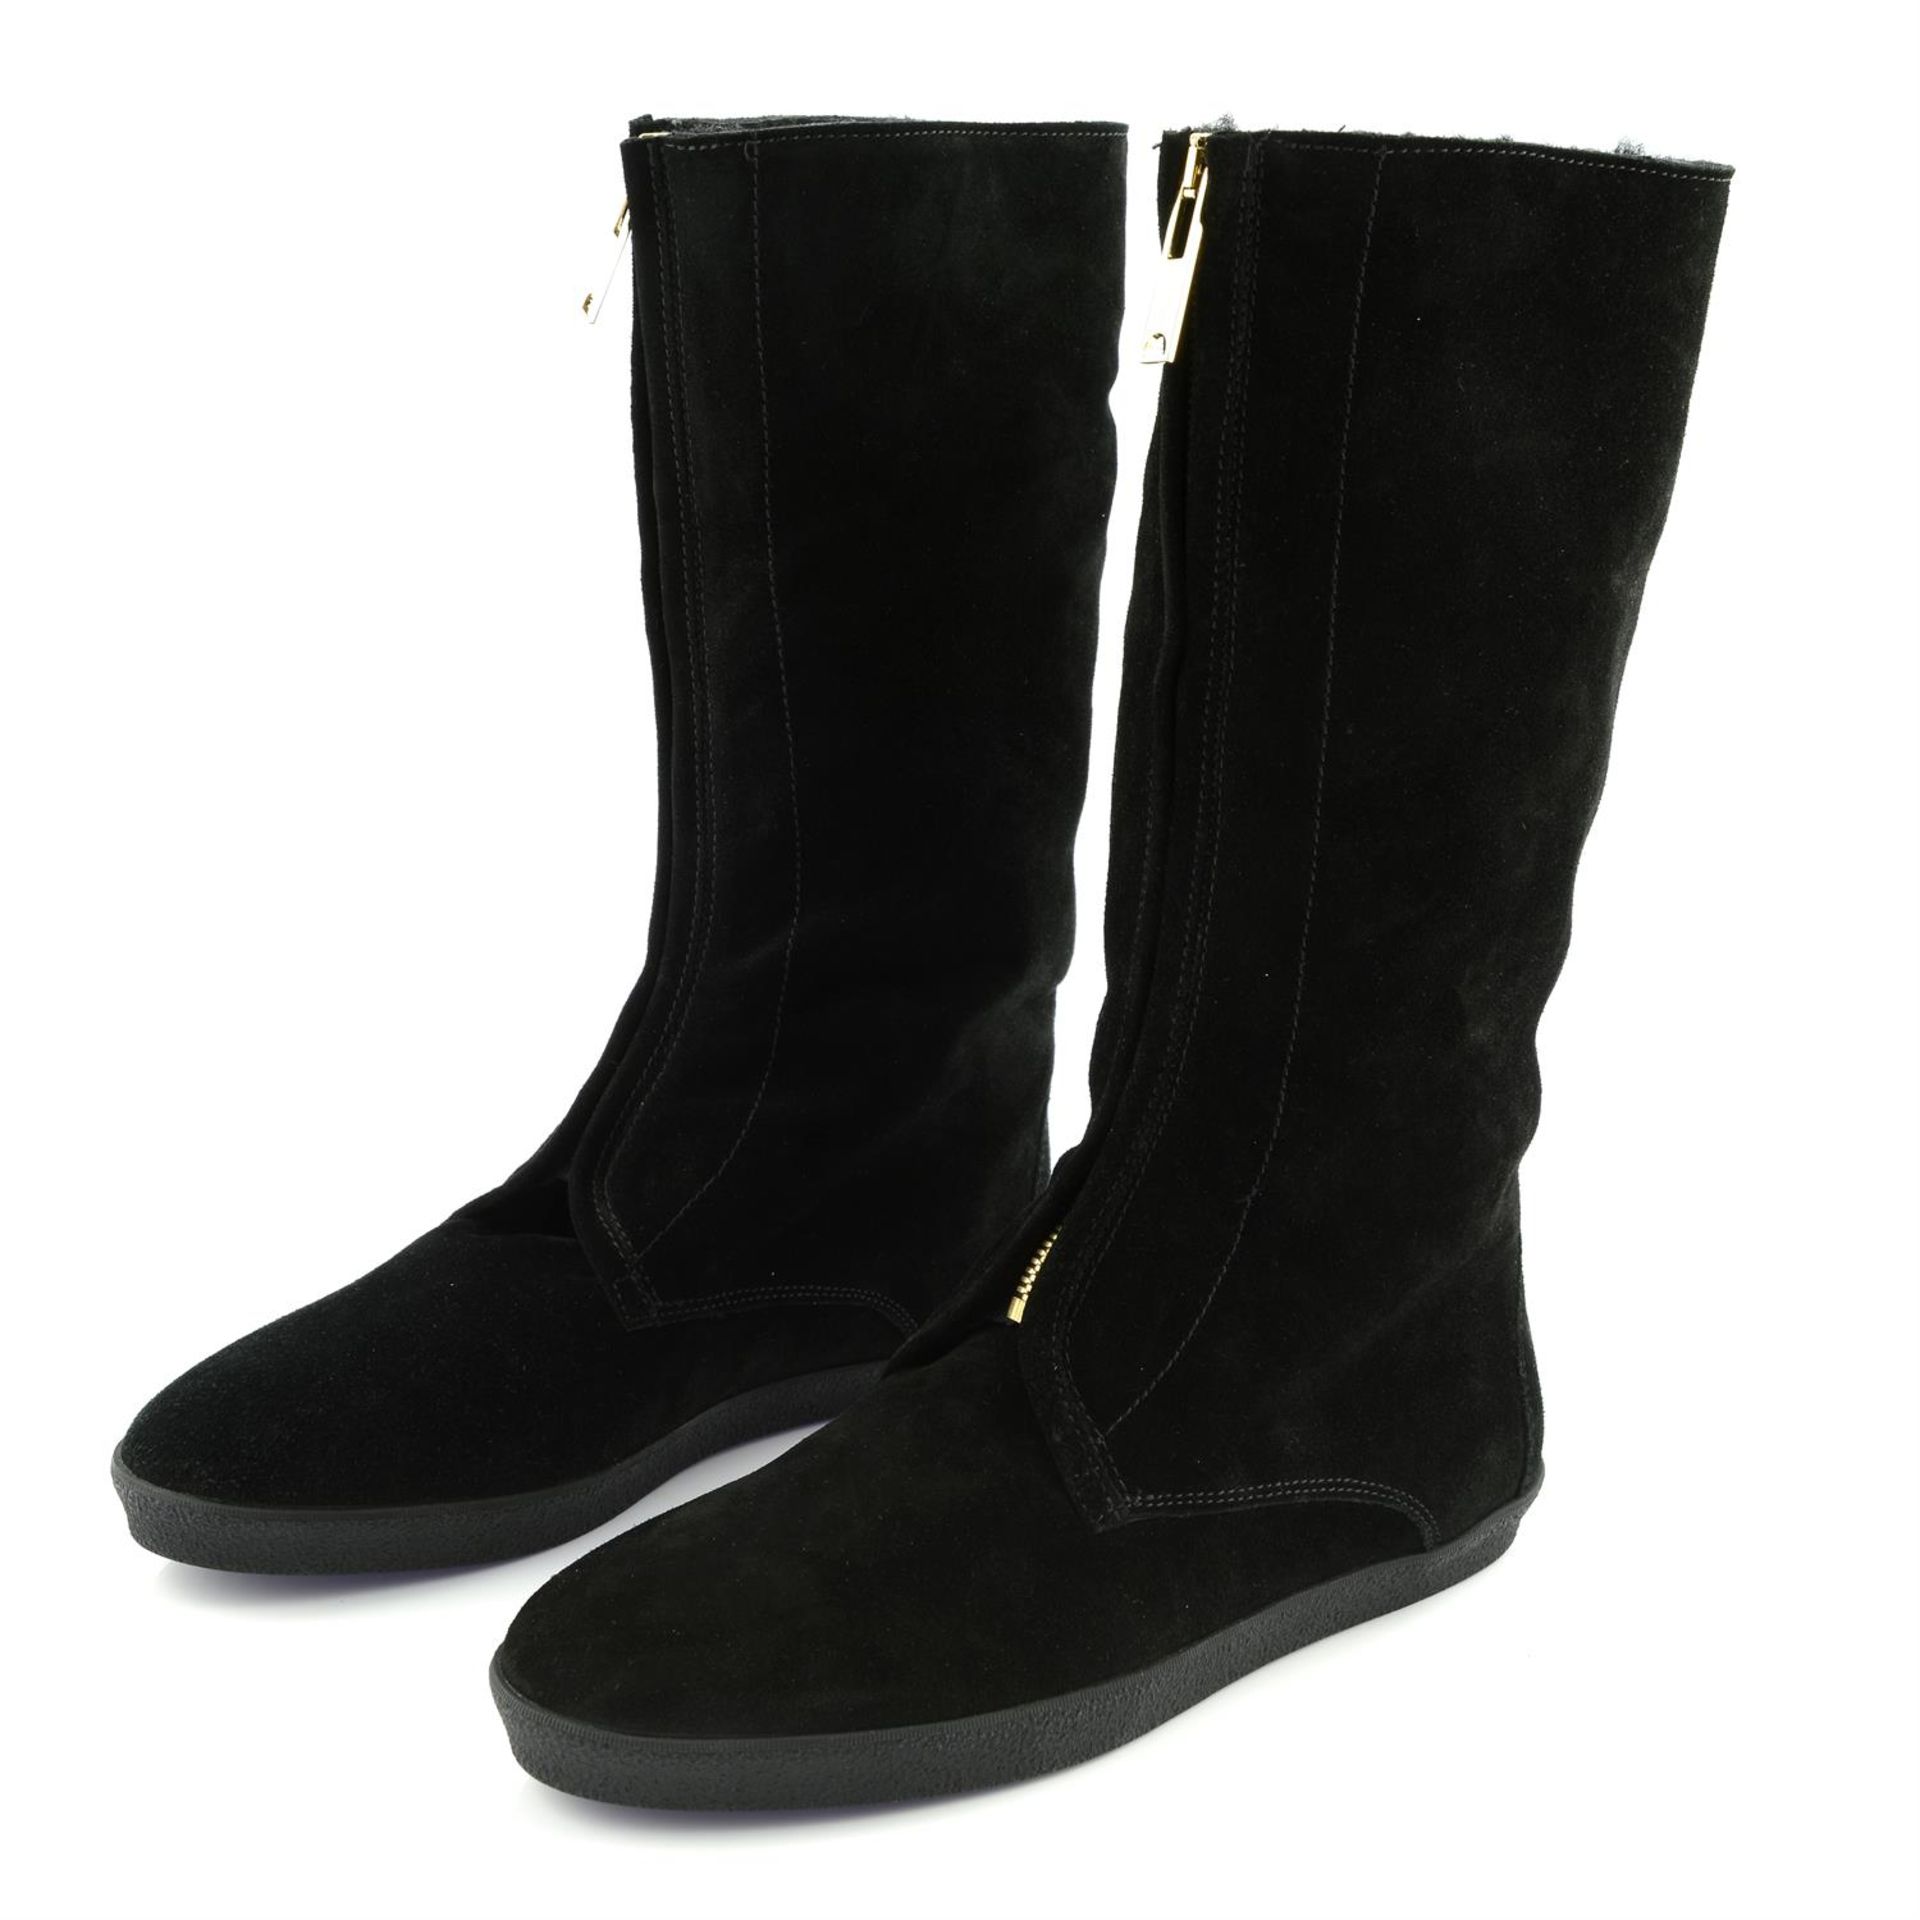 BURBERRY - a pair of black suede Stanmore fold over snow boots.